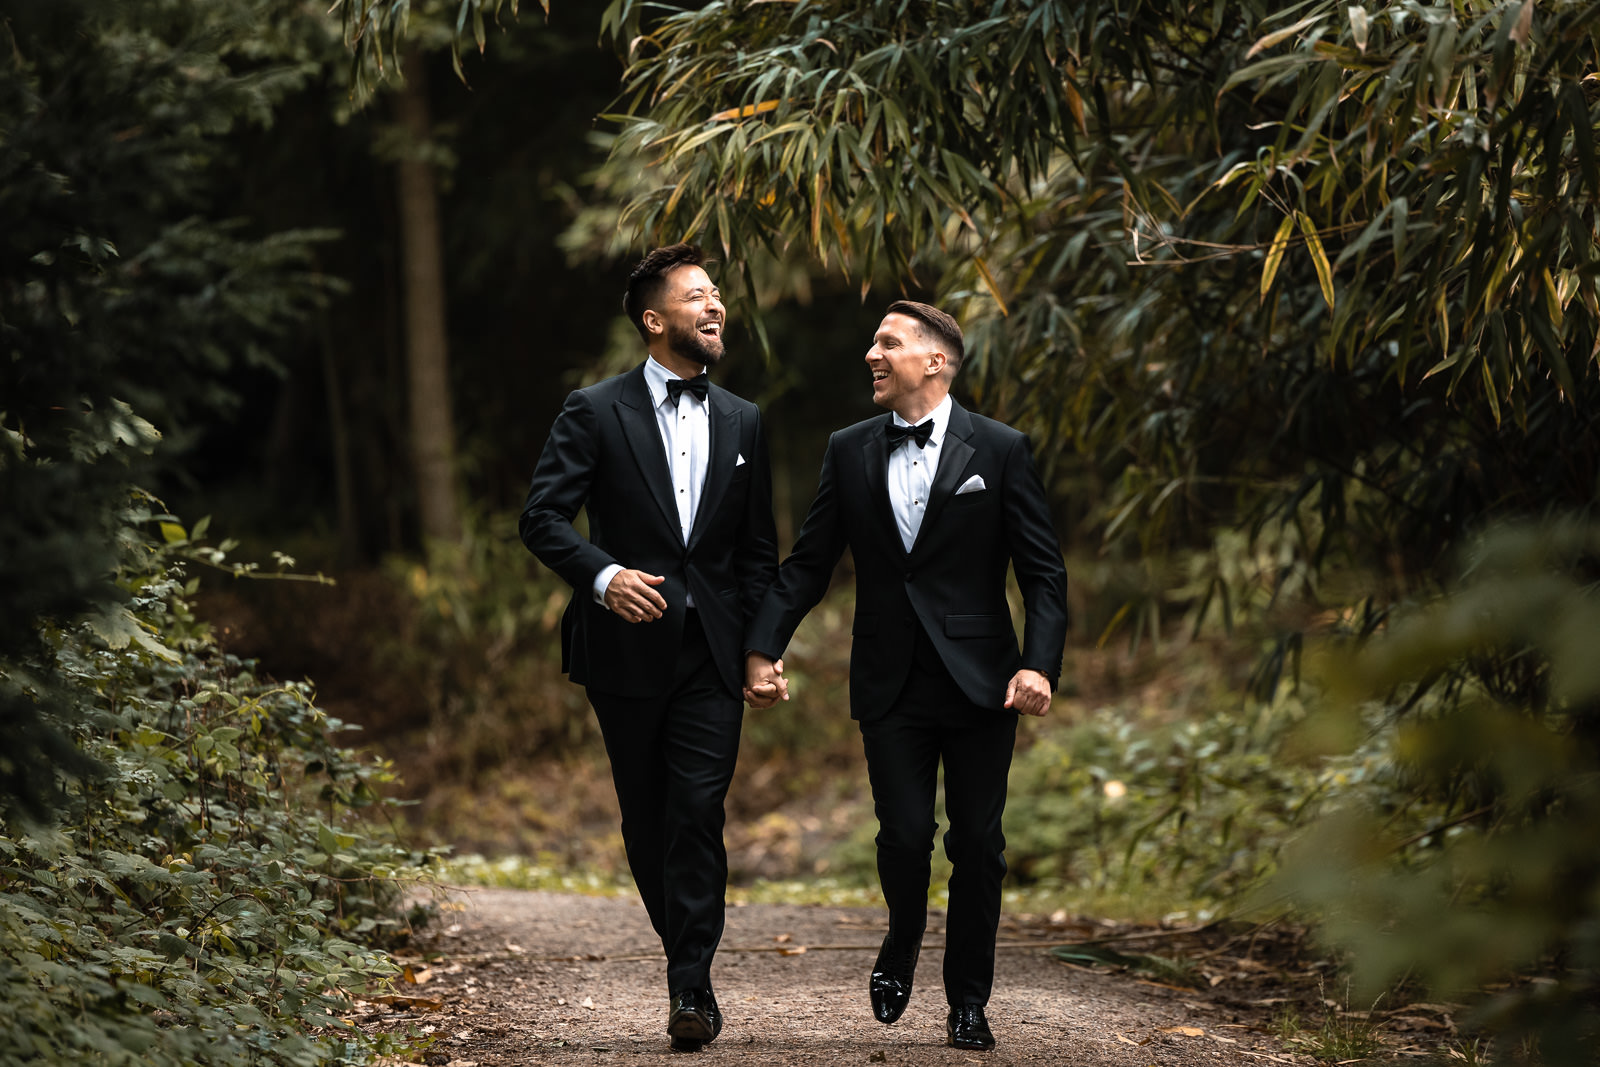 Two grooms frolicking together during their wedding shoot